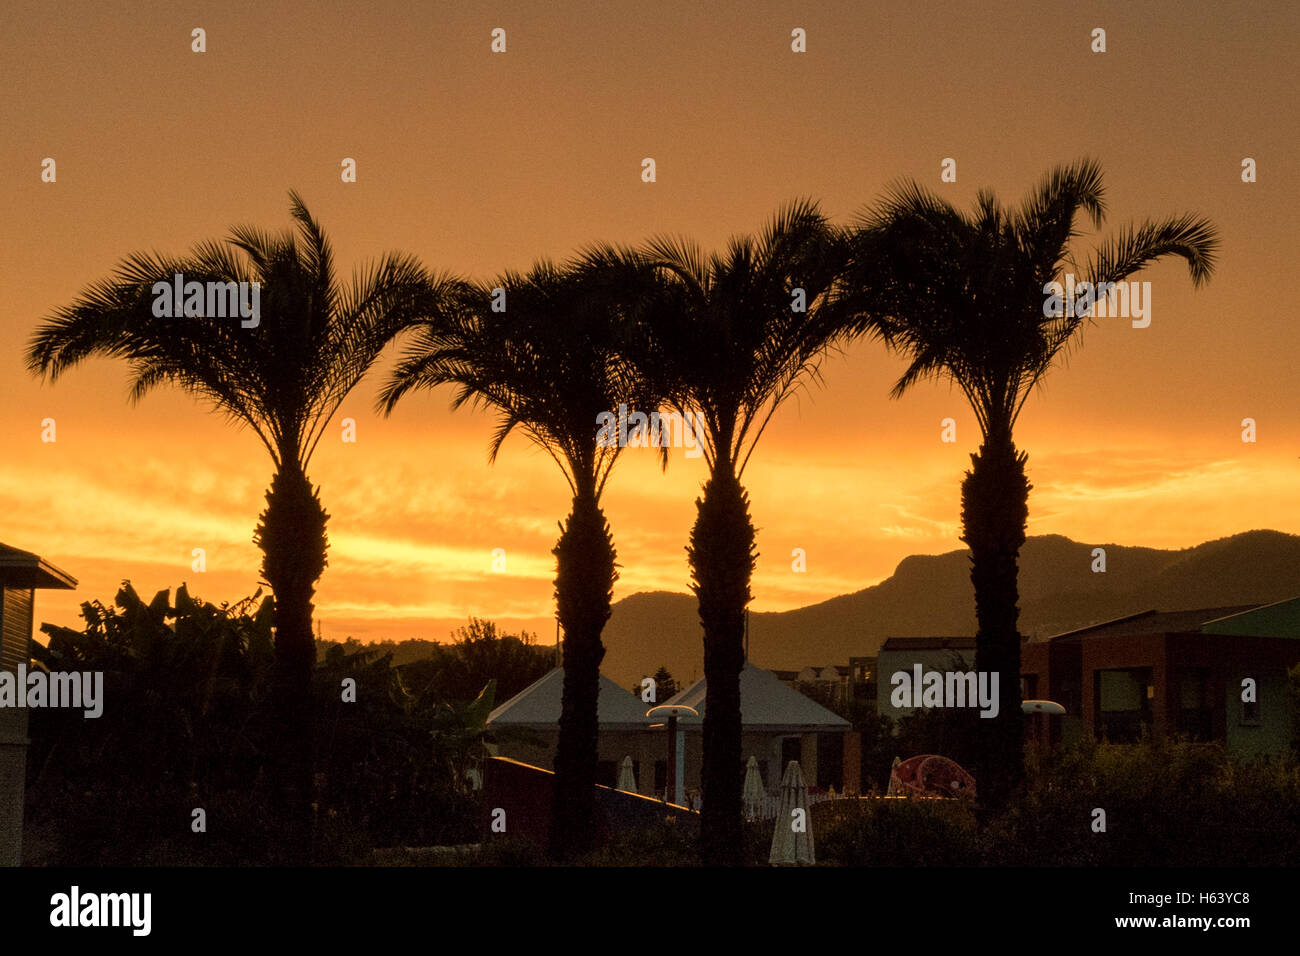 four palm trees in silhouette against orange evening sky Stock Photo